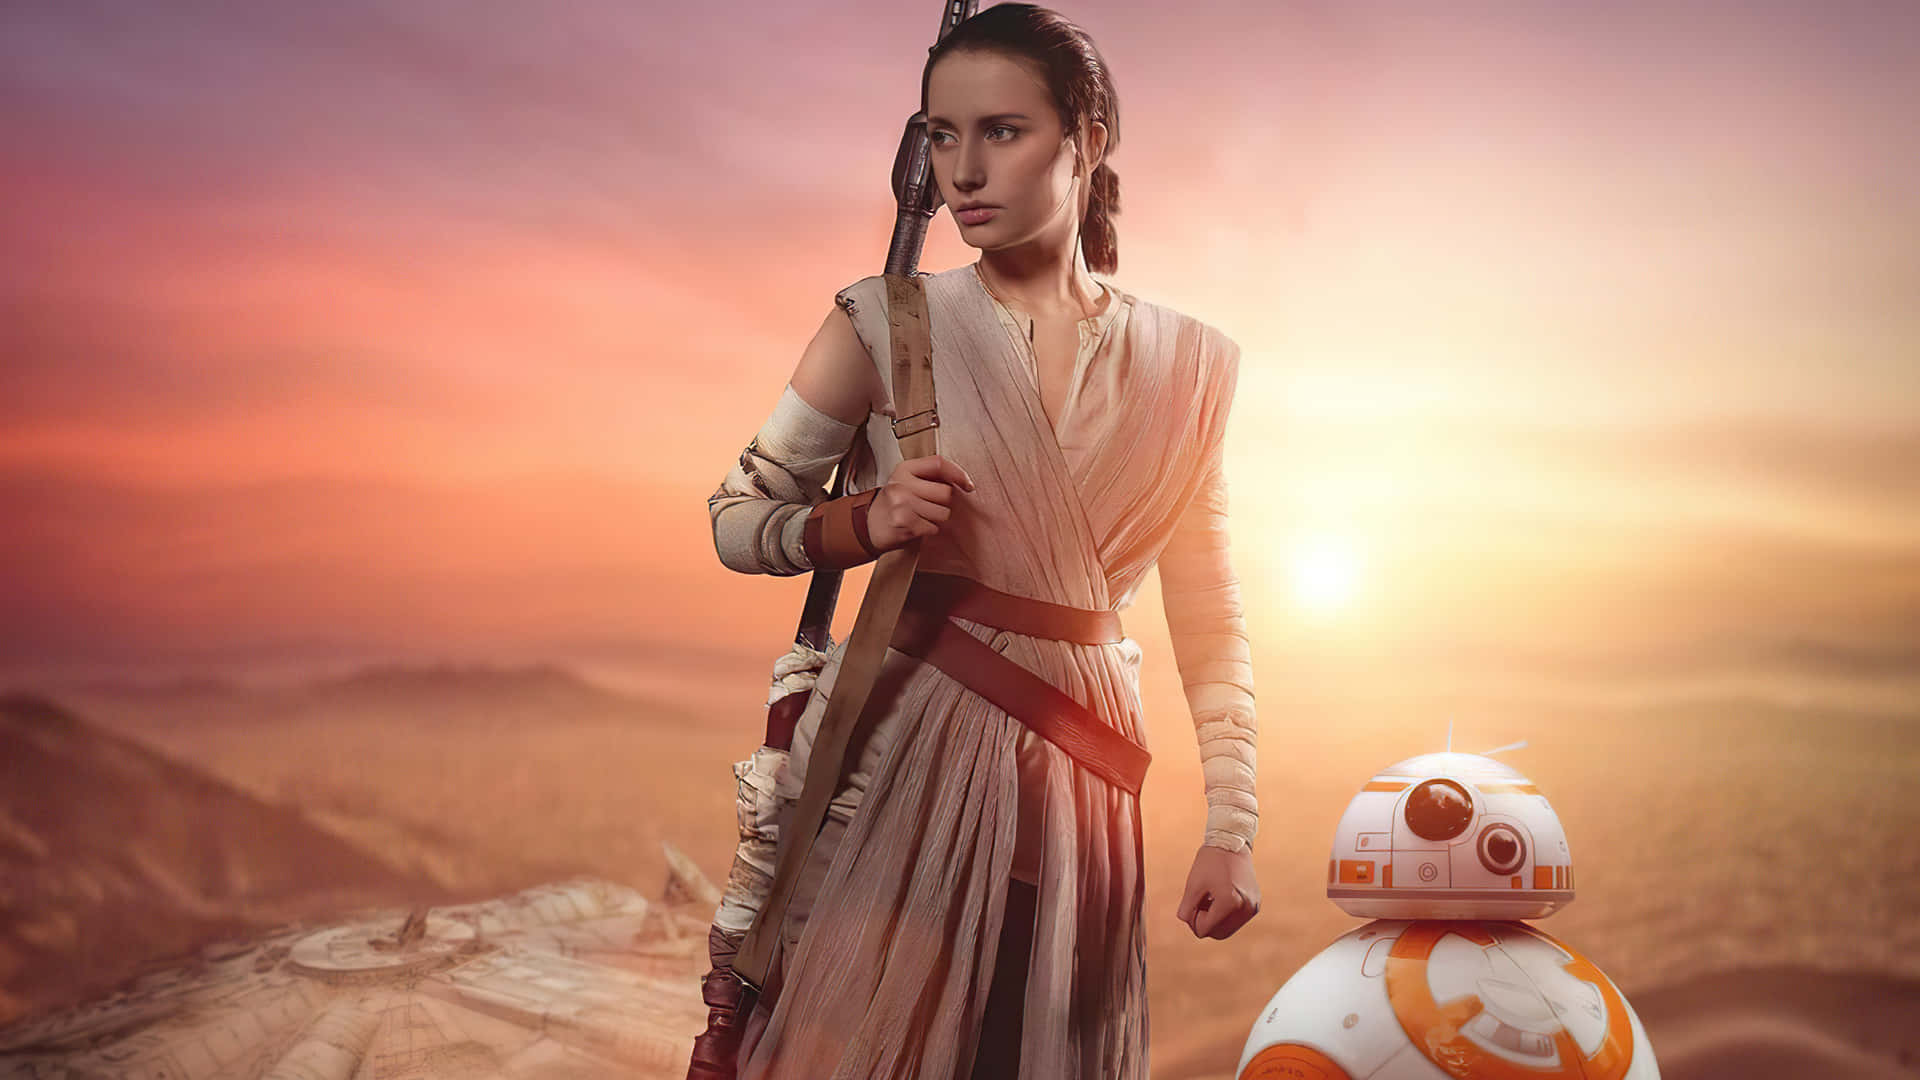 Be ready to get up close and personal with BB-8 Wallpaper